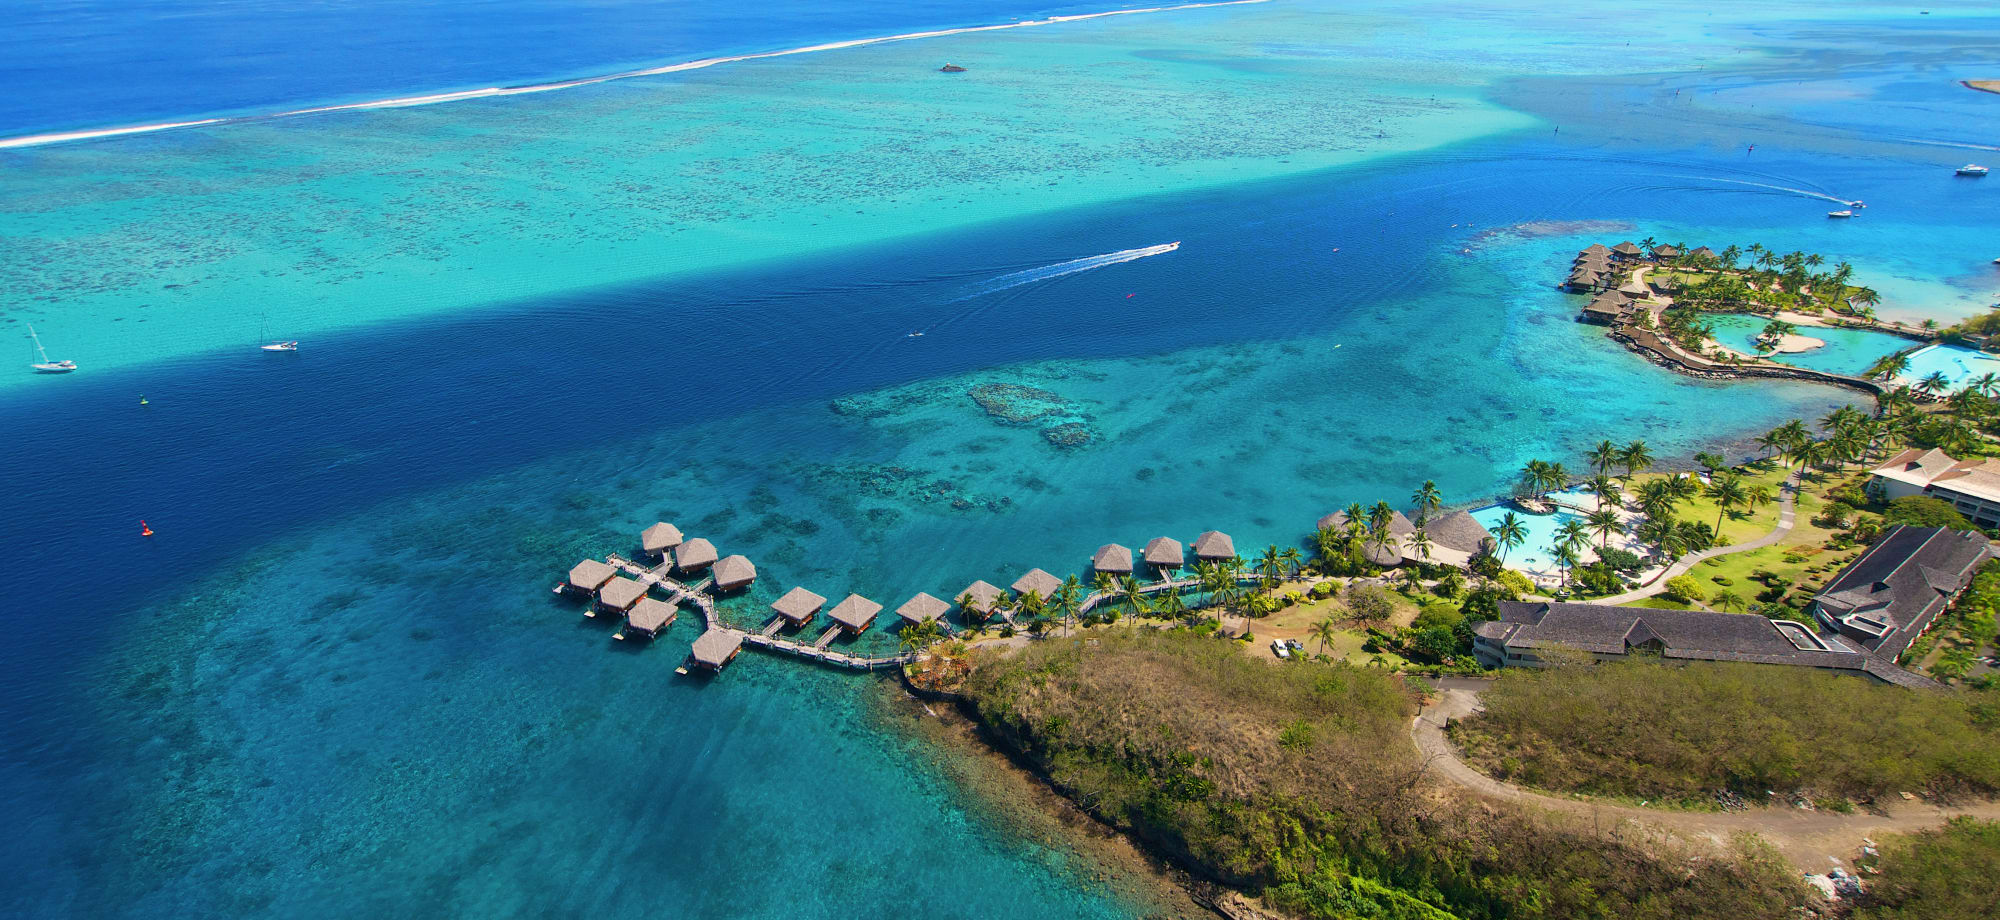 InterContinental Tahiti is an island with overwater bungalows jutting into the turquoise sea. 